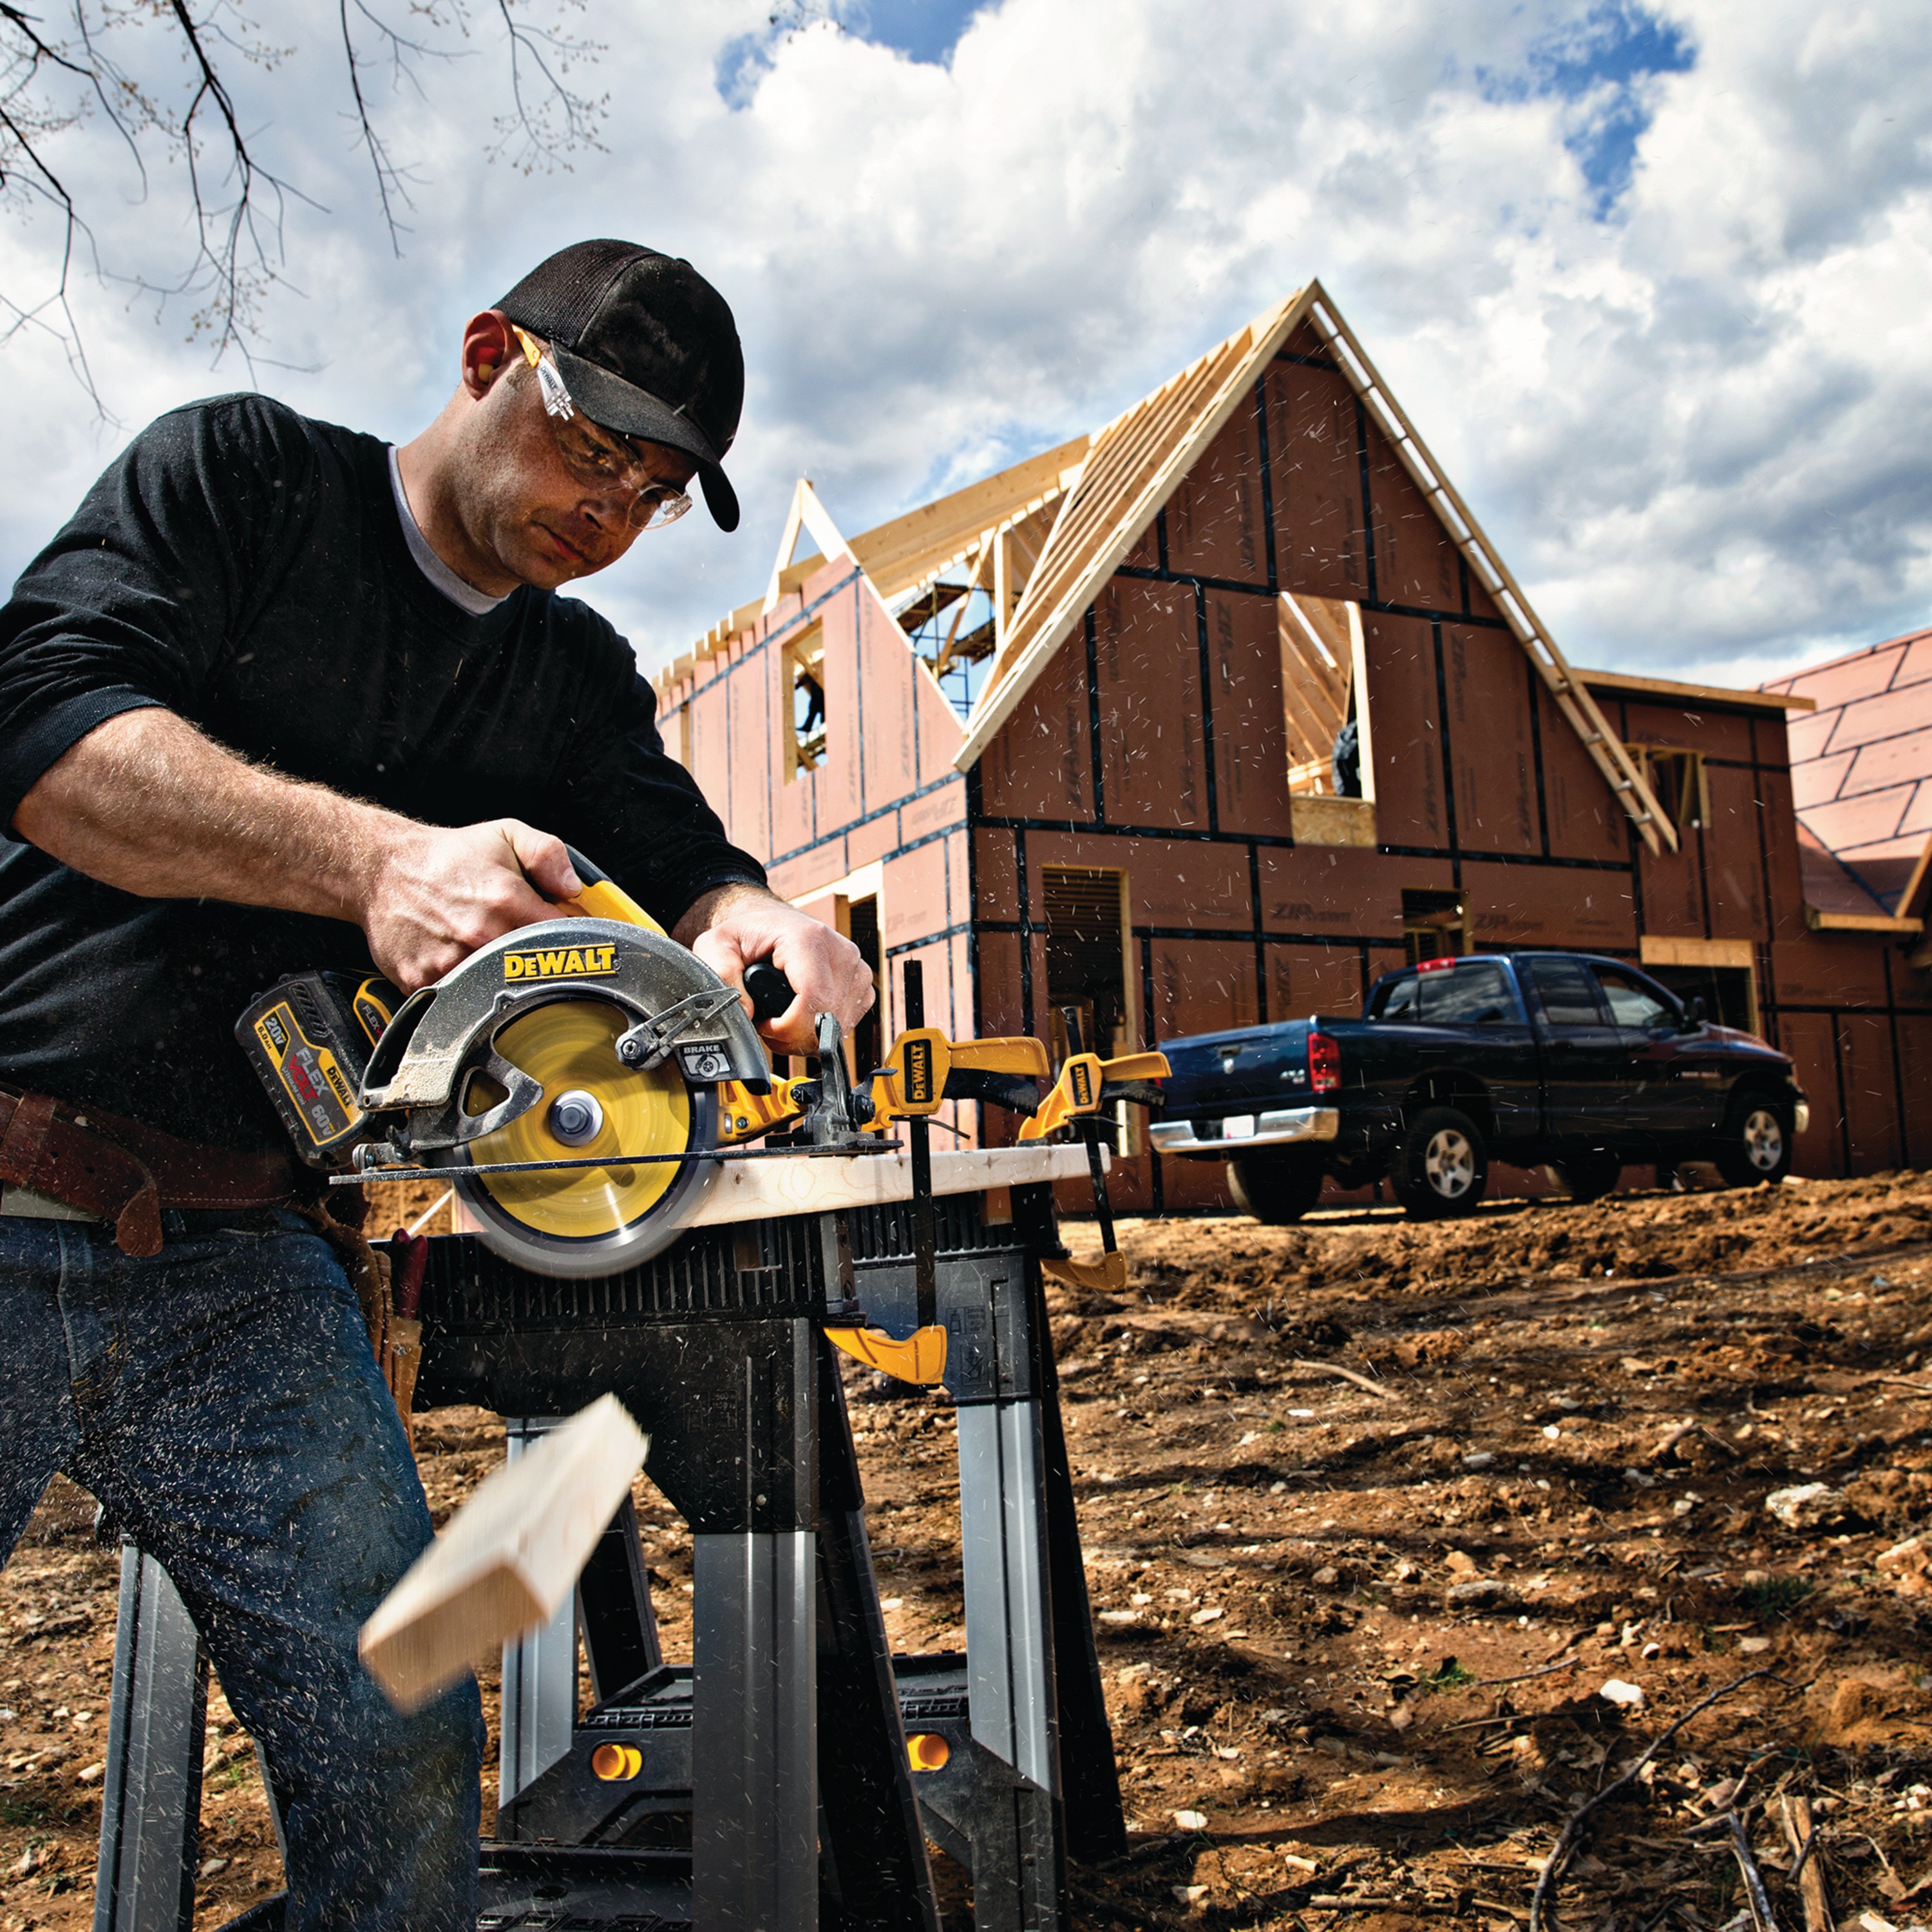 FLEXVOLT 7-quarter inch circular saw blade being used by a person outdoors.